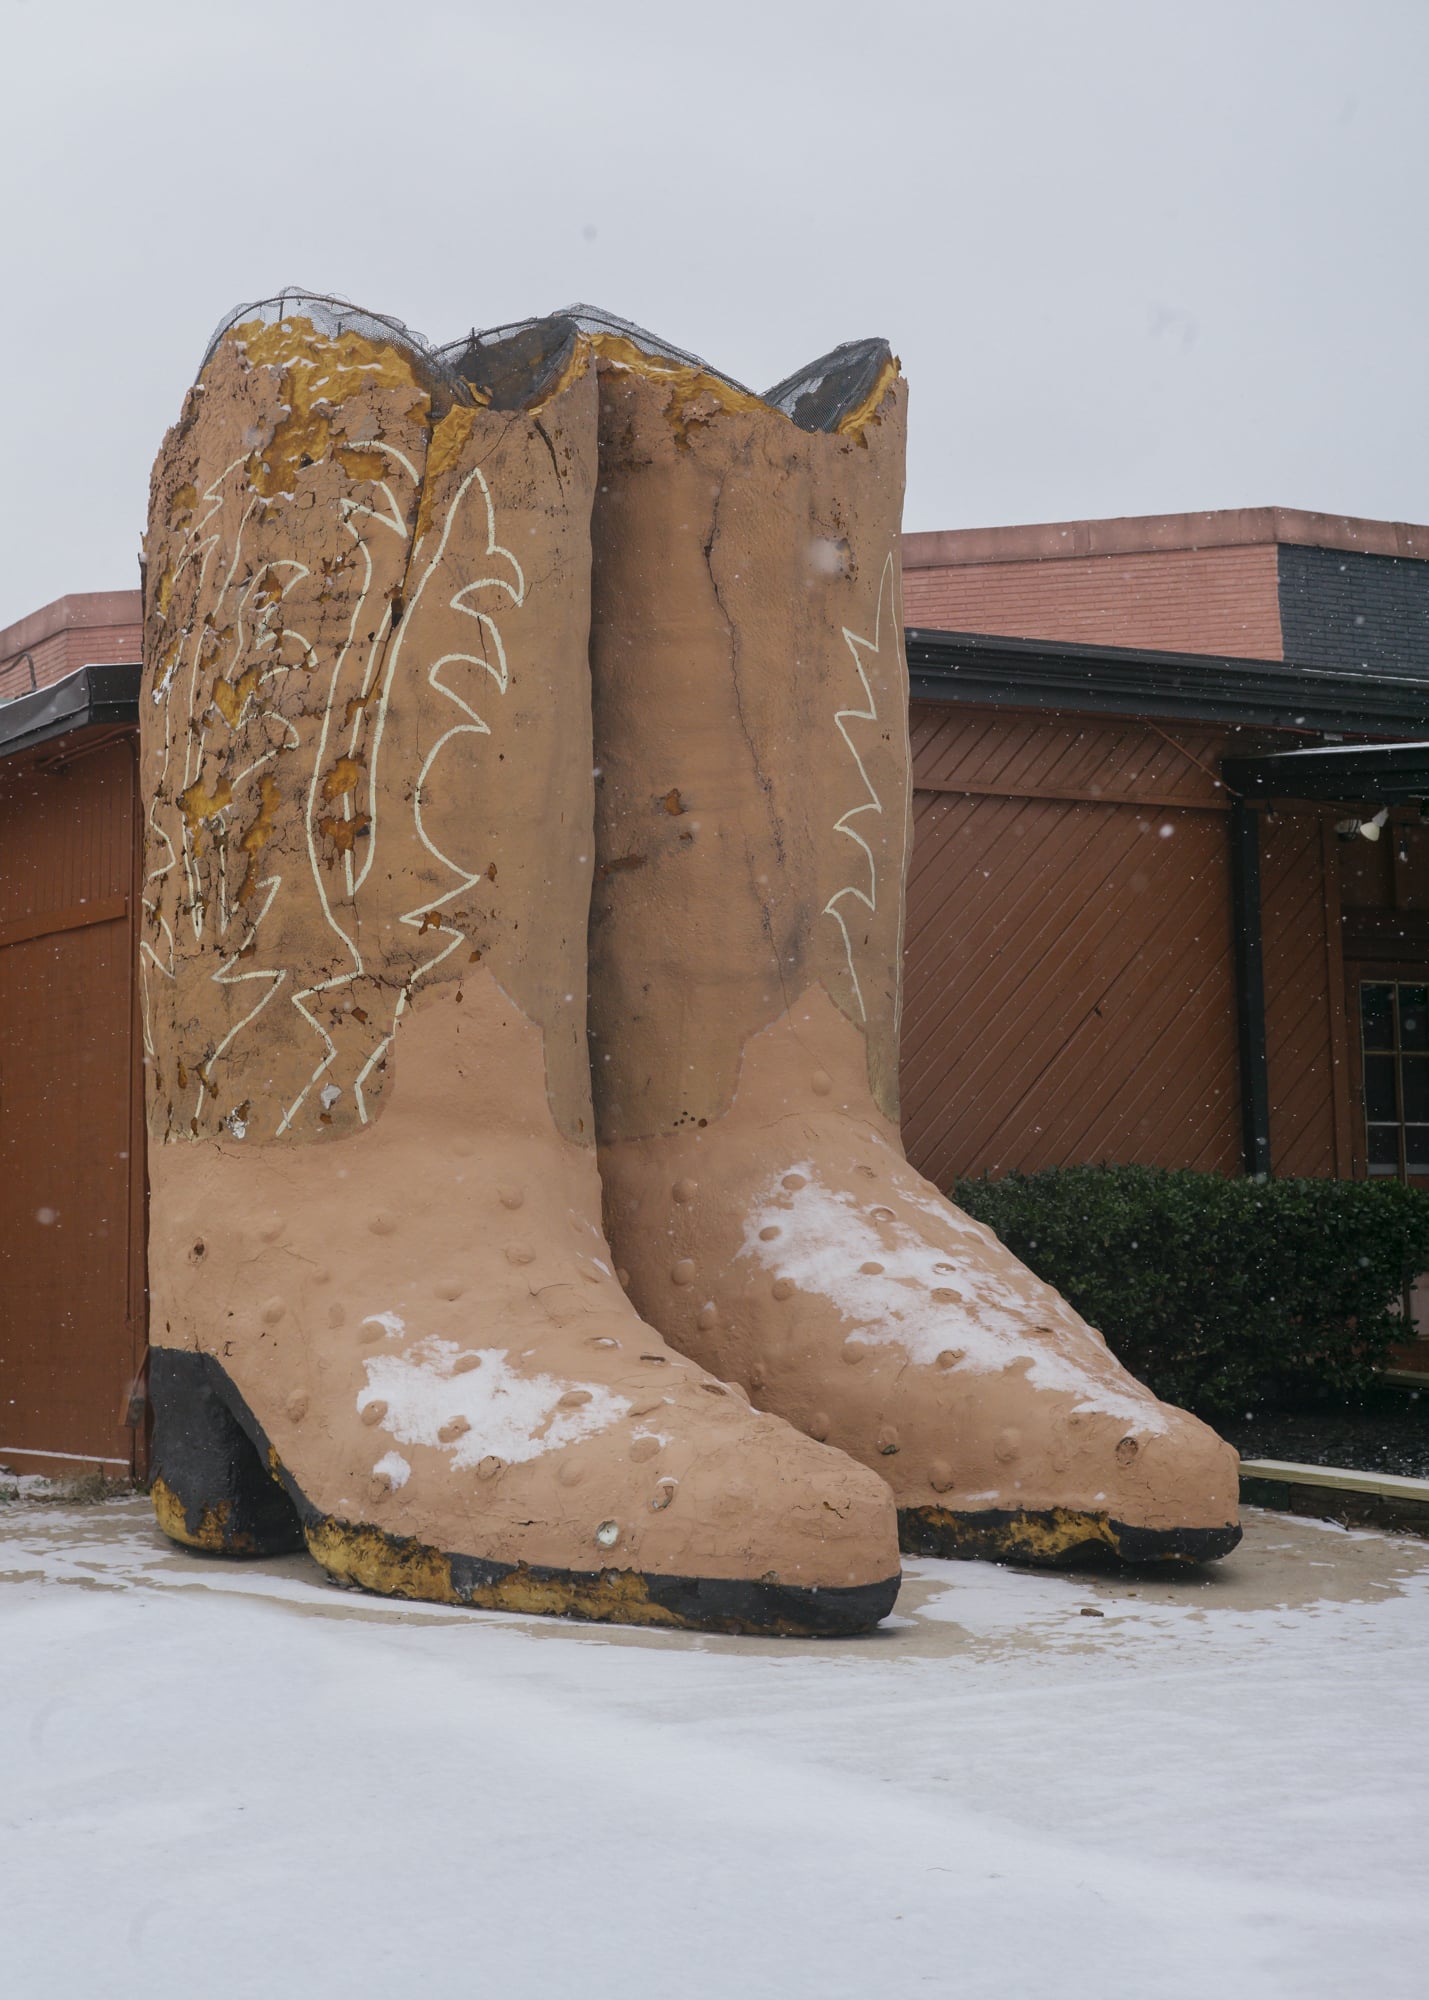 Large cowboy boots in the snow